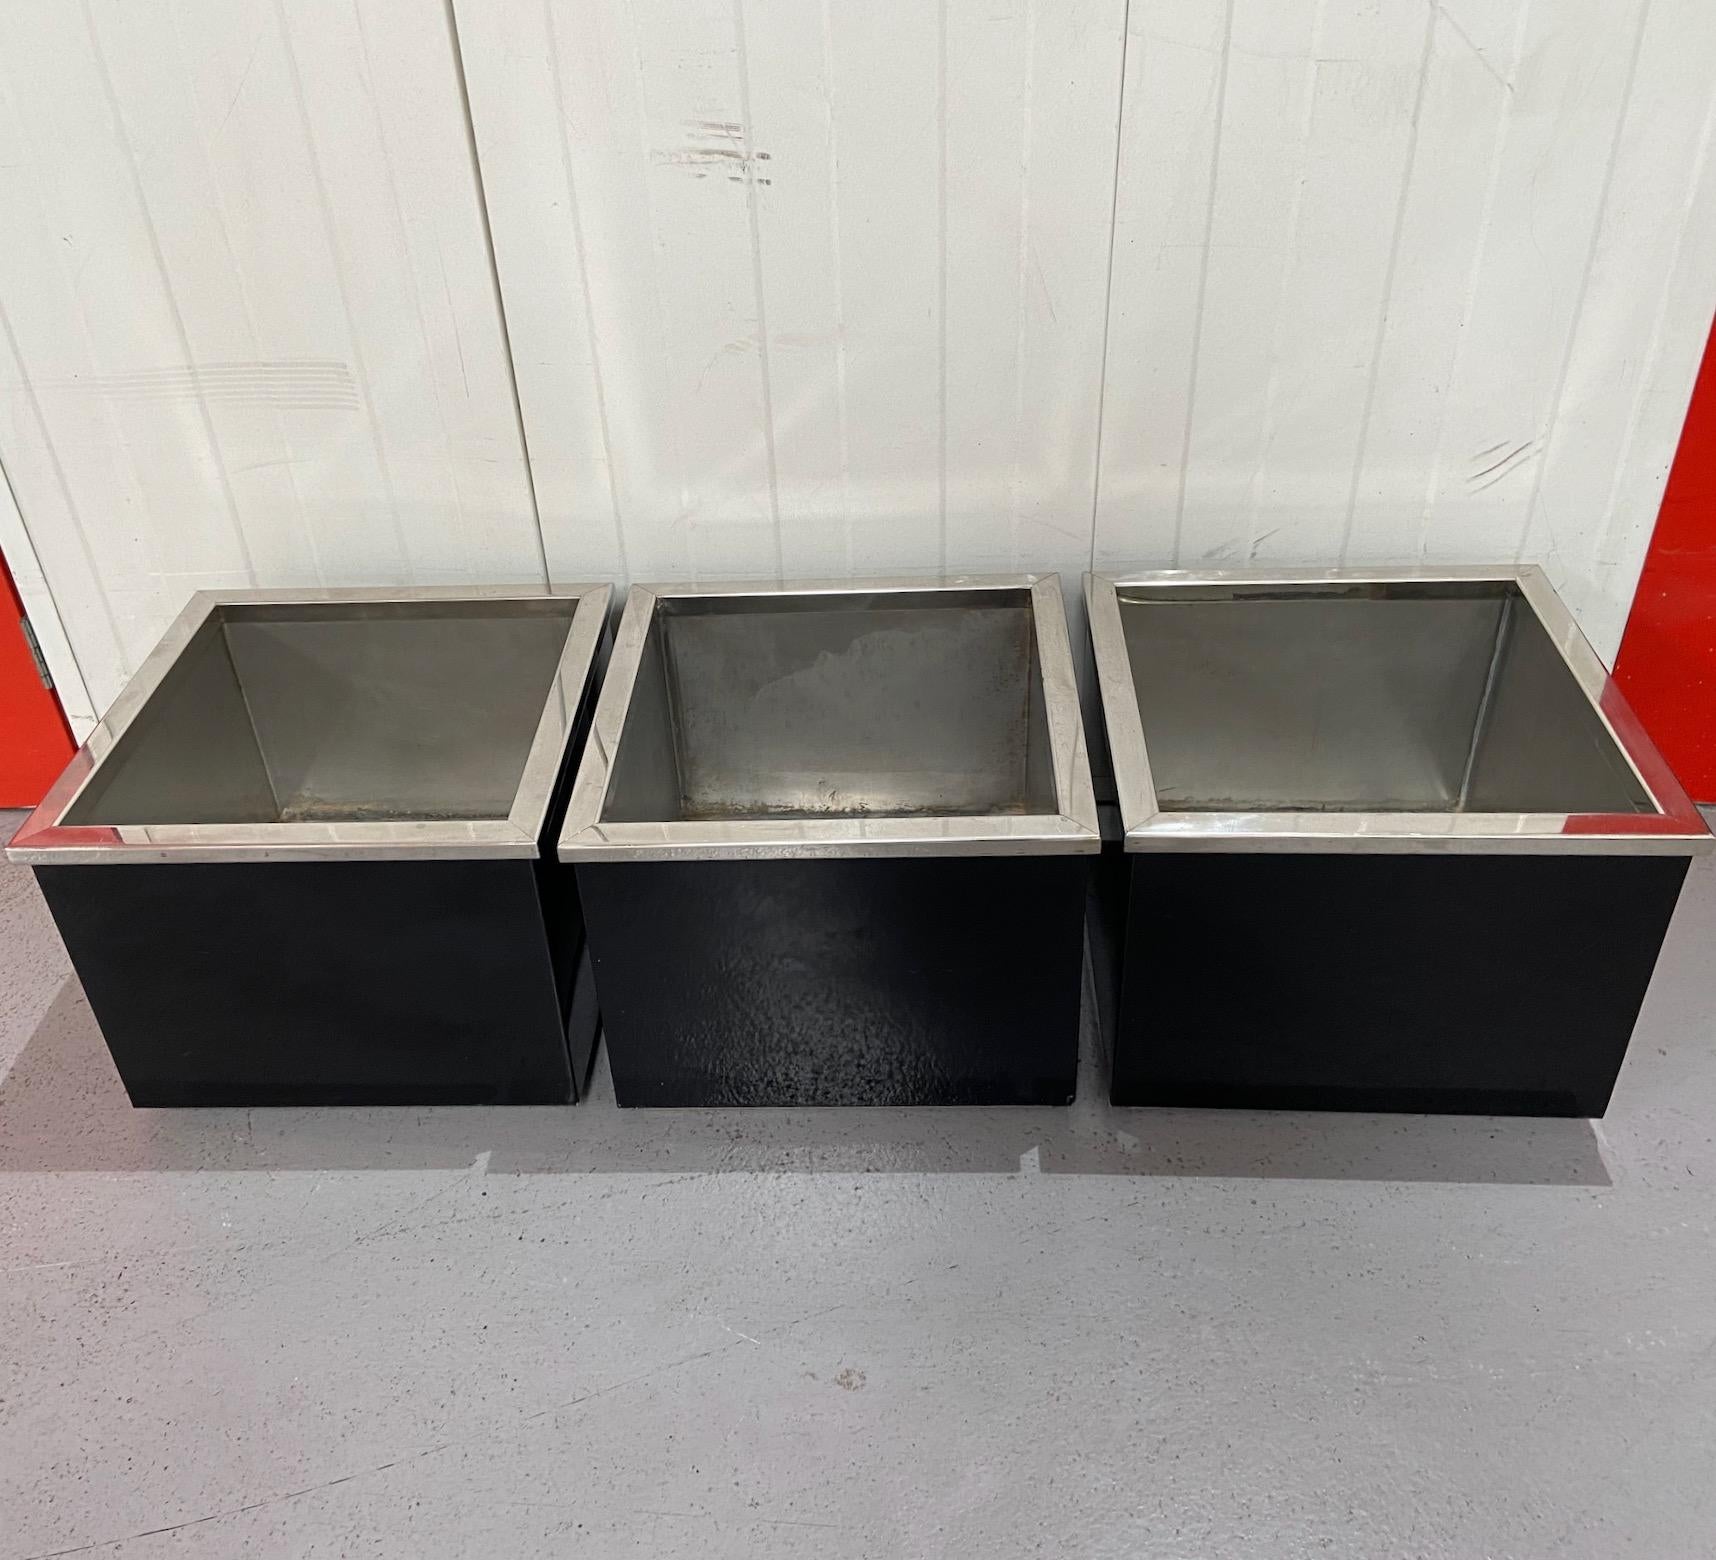 1960s-70s black enamel and chrome metal cubic planters, manner of Willy Rizzo For Sale 3